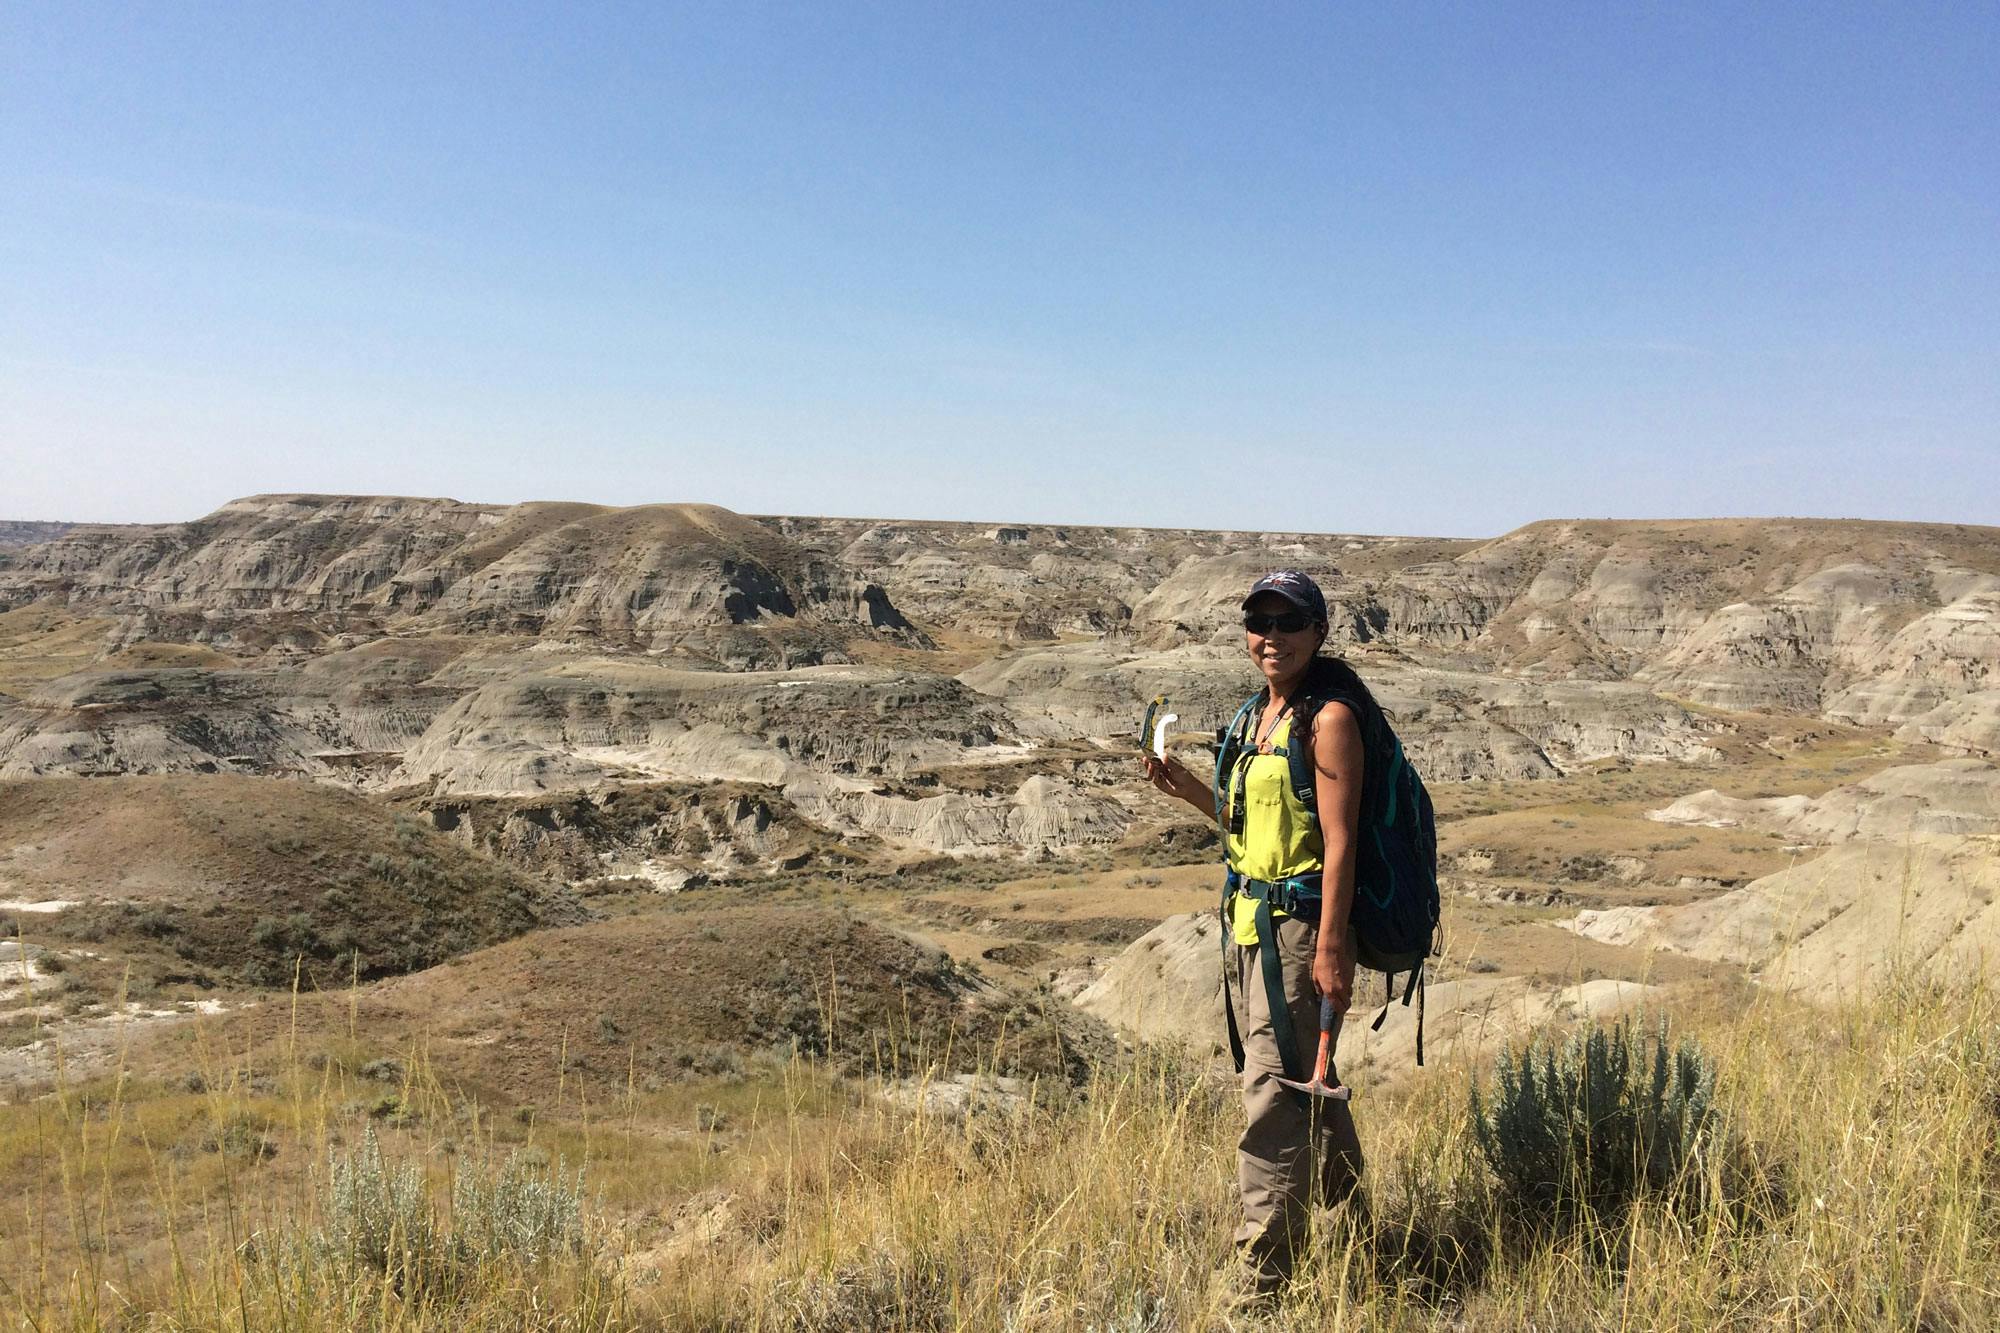 Akiko Shinya holds a pick hammer and stands in a grassy area with badlands in the background.